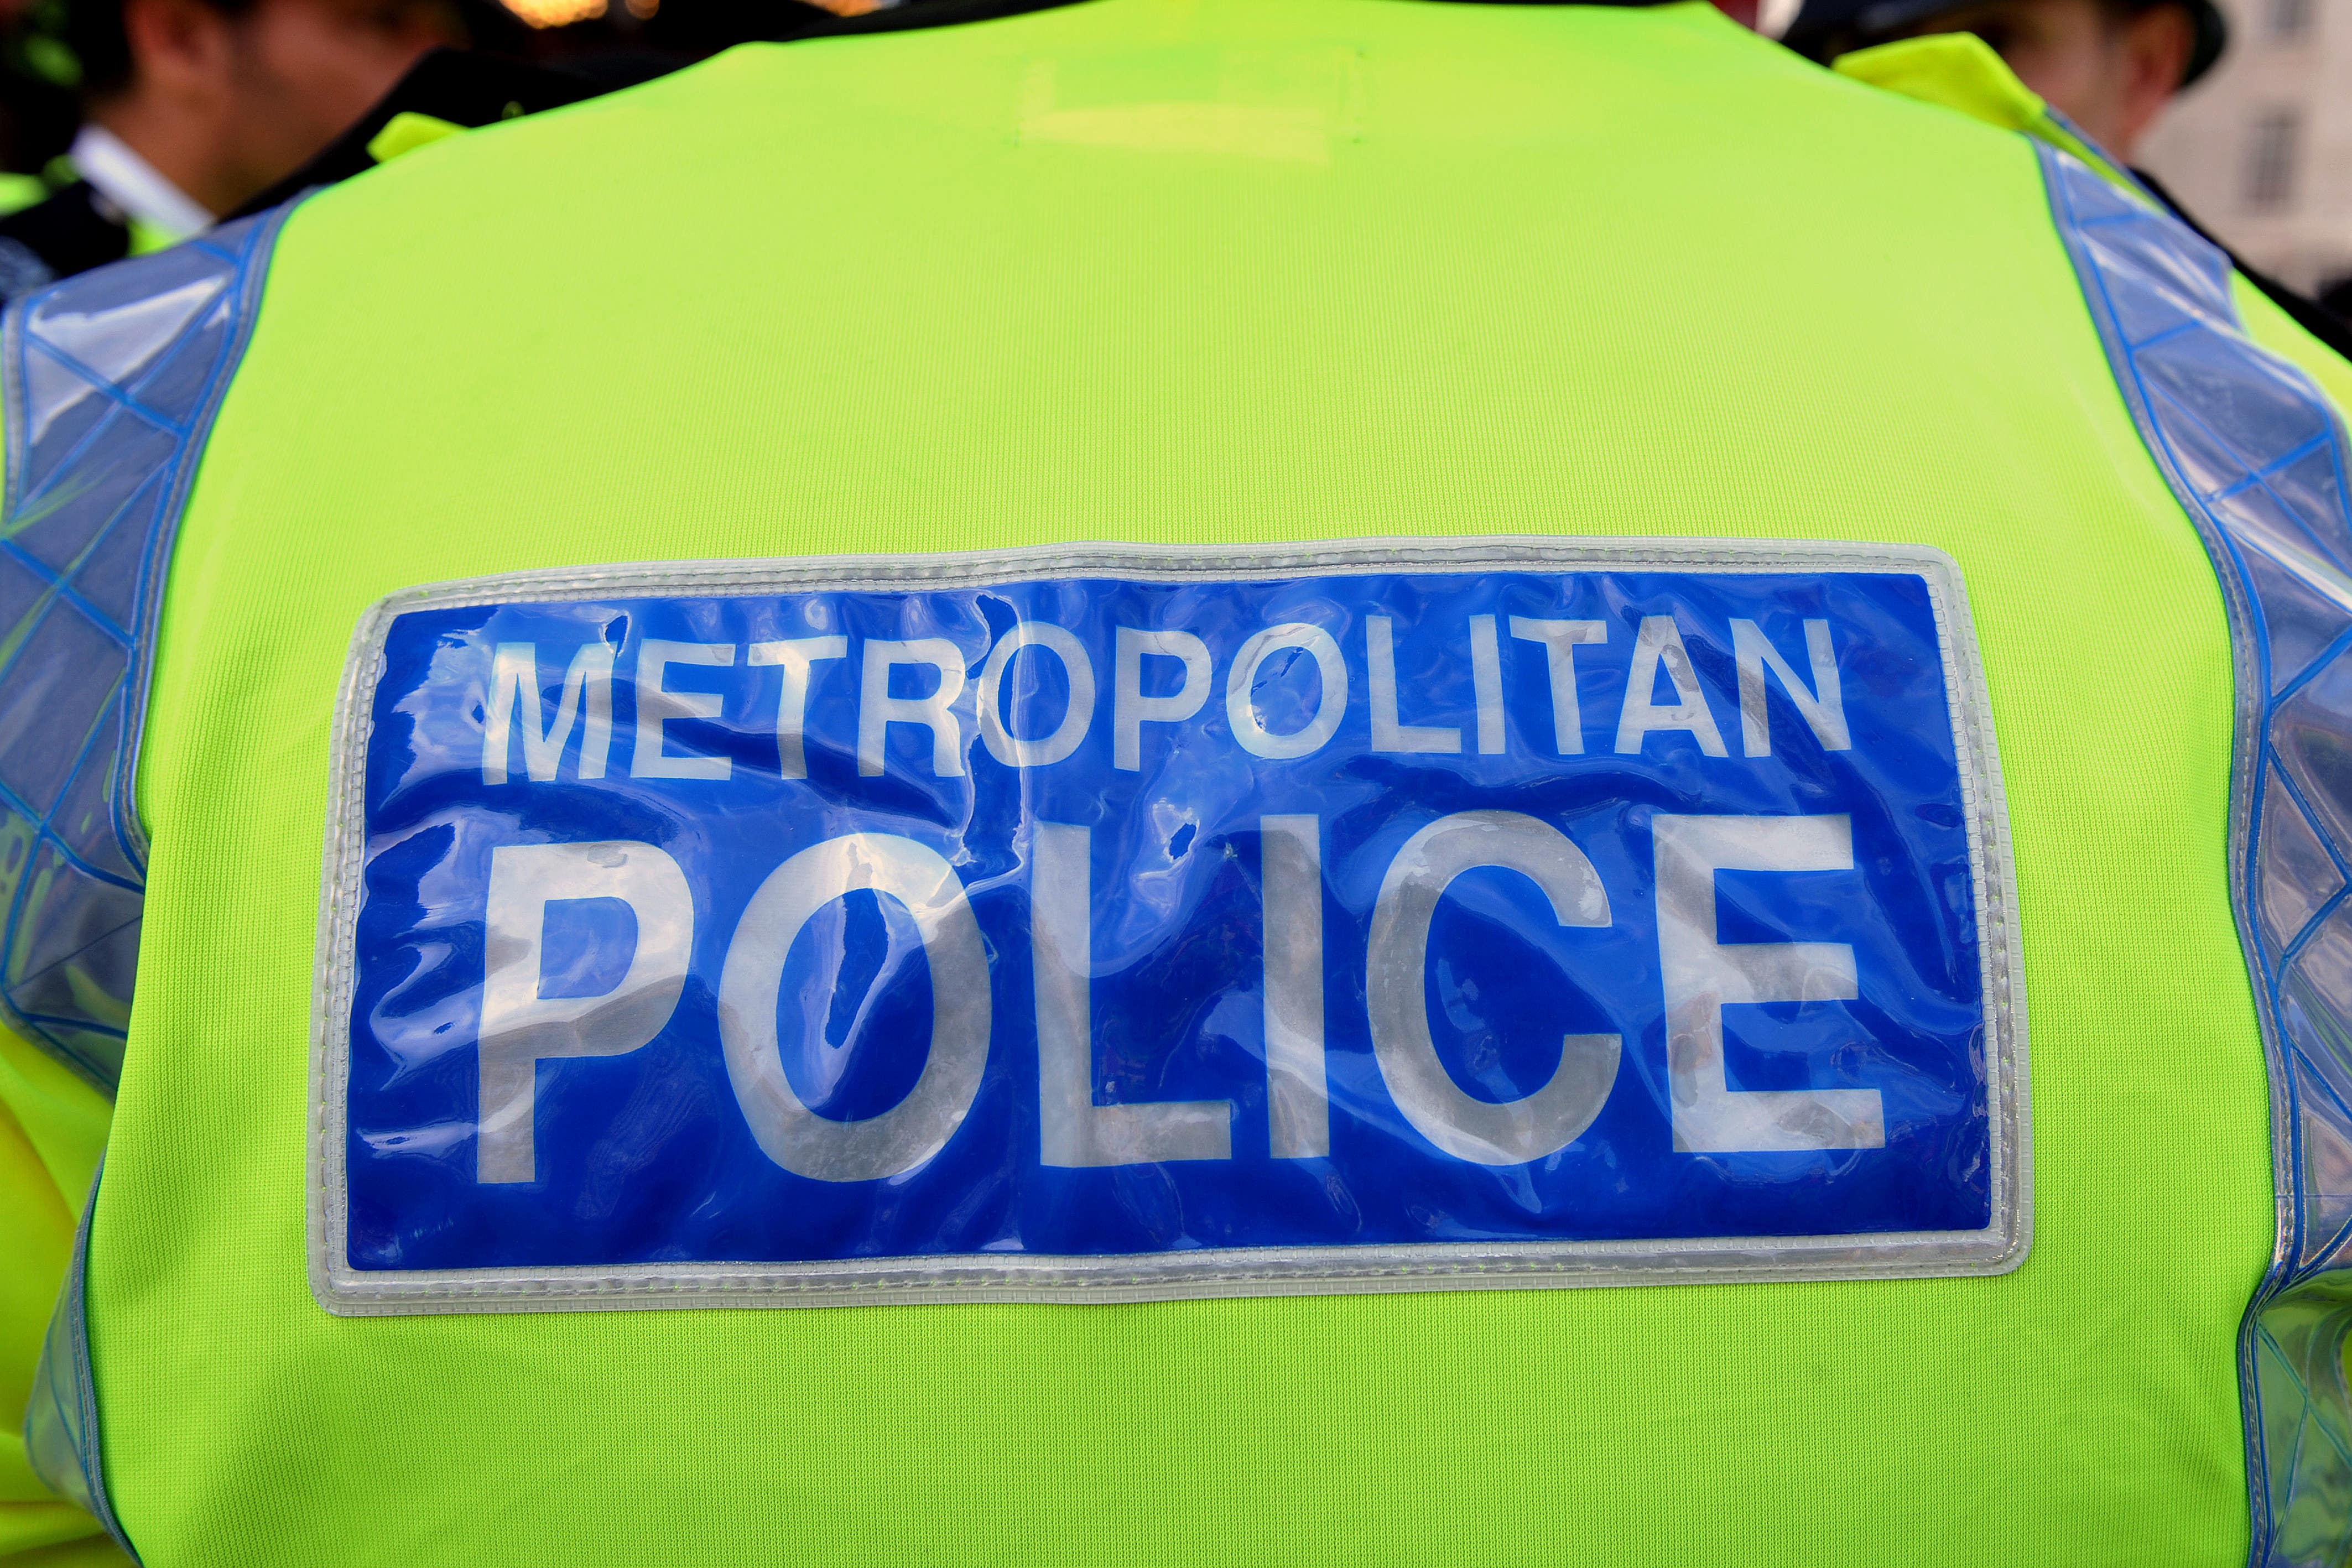 The Met have confirmed that their officer remains on restricted duties